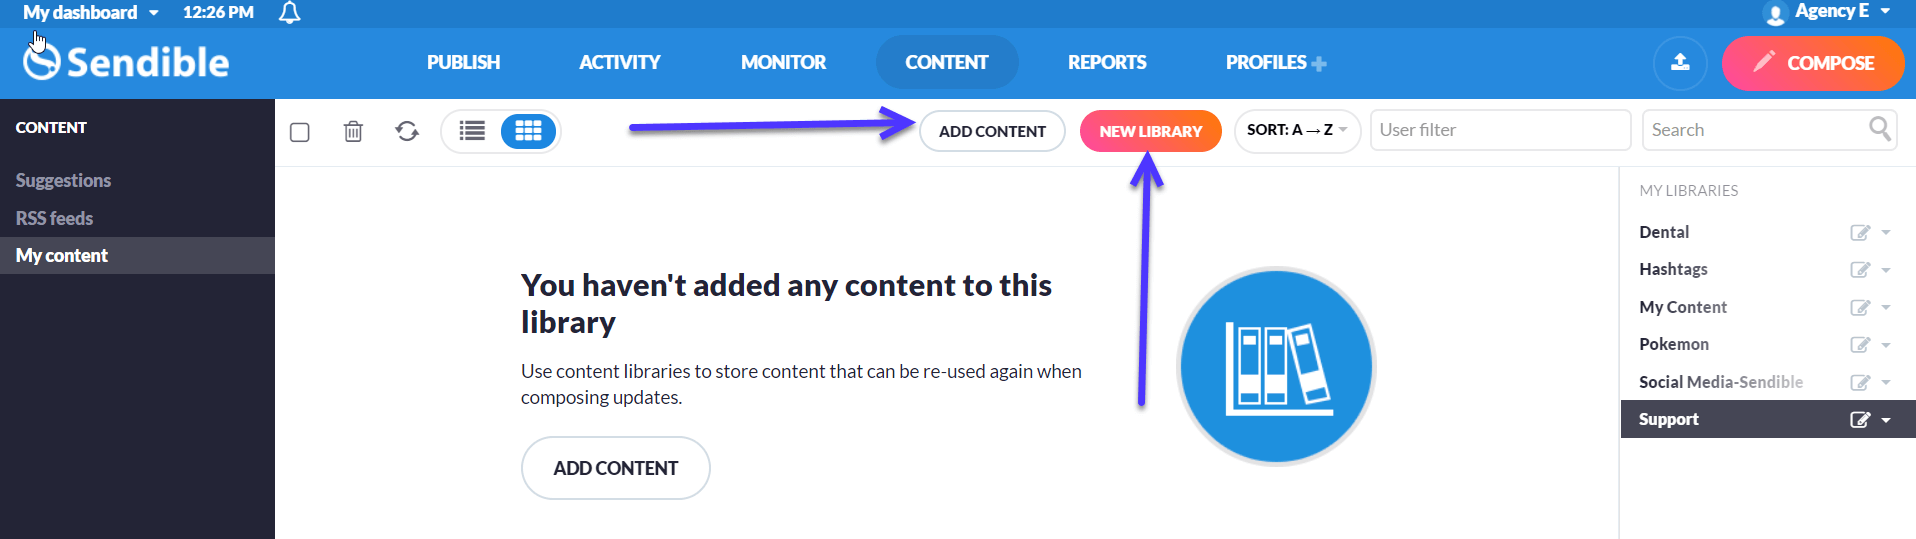 Create_a_content_library_add_content__1_.png